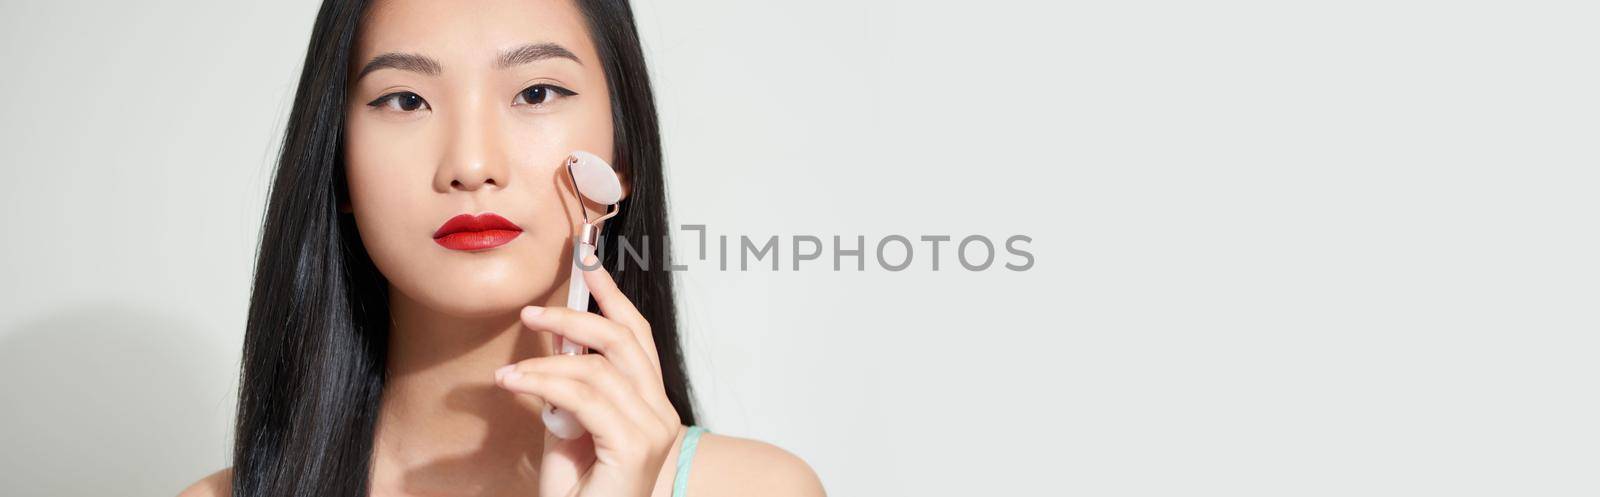 Face massage. Smiling woman using rose quartz facial roller for skin care, beauty treatment on white isolate background.